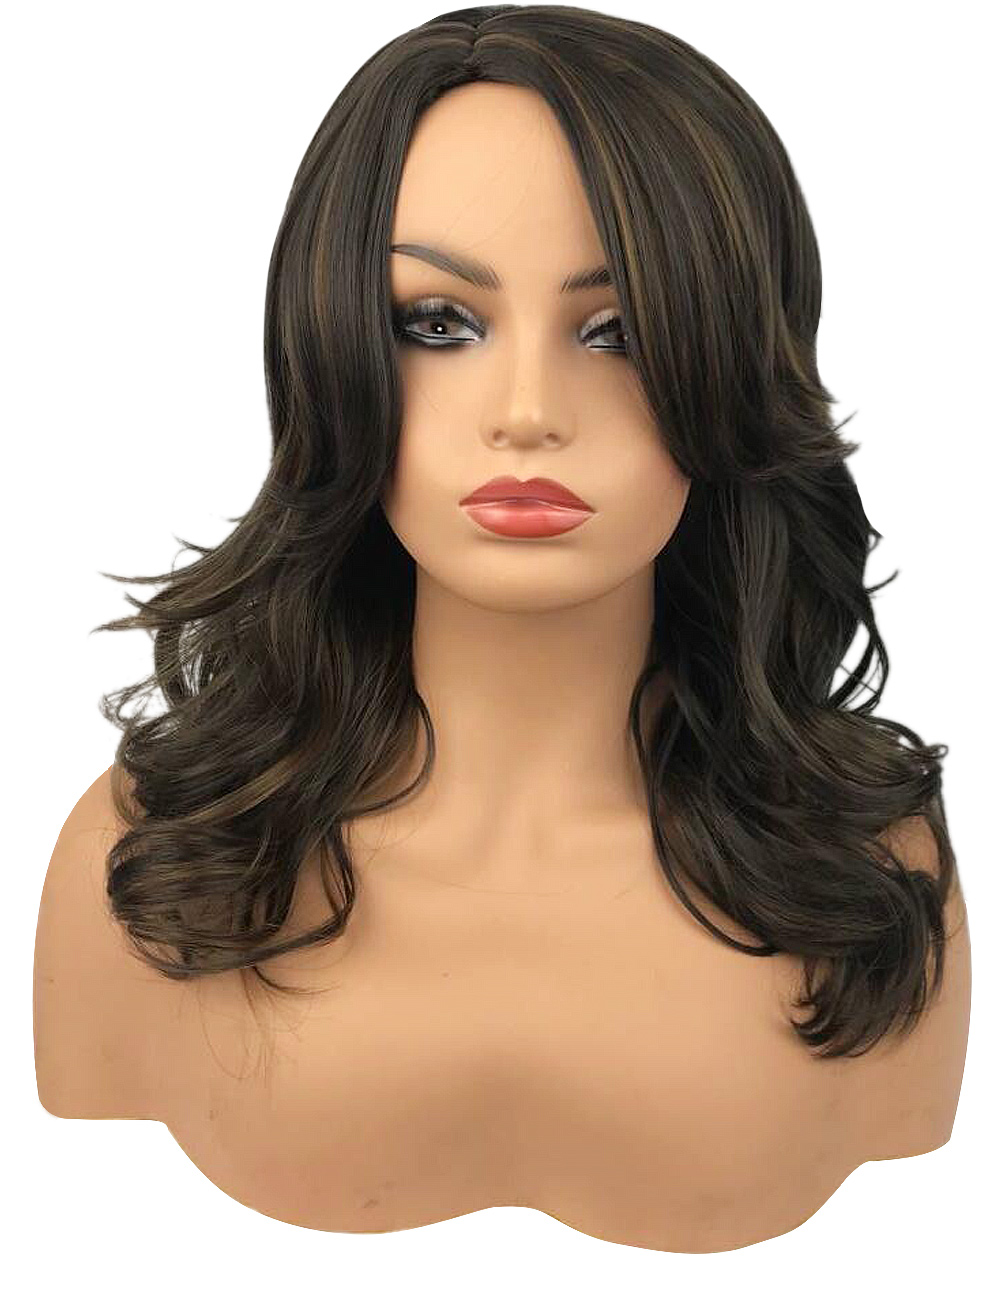 Ericdress Women's Medium Bob Hairstyles Wavy Synthetic Hair Wigs 16 Inches